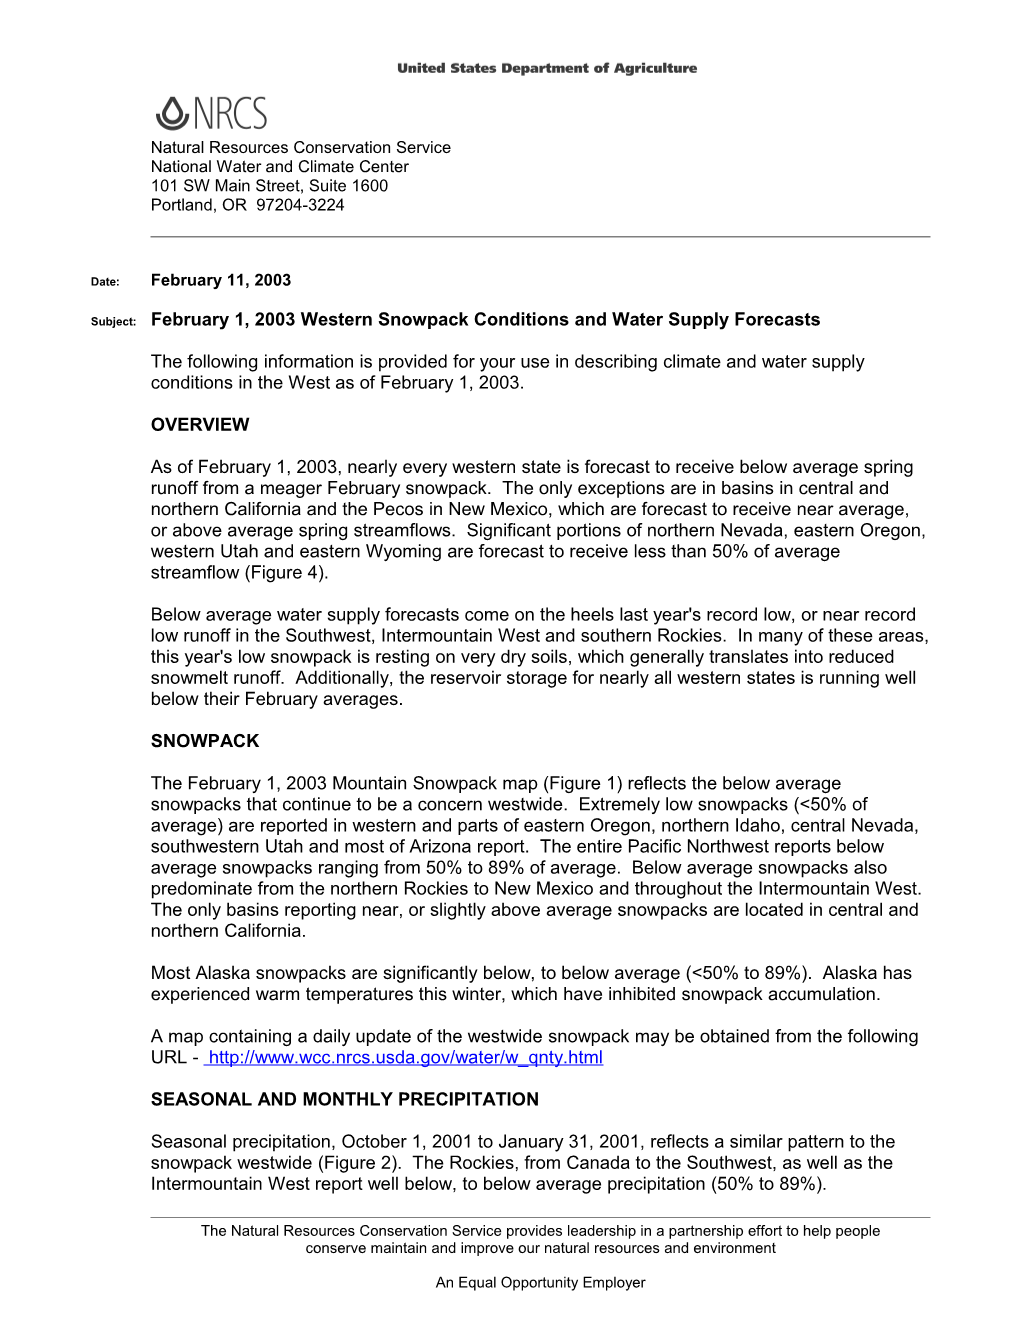 Subject: February 1, 2003 Western Snowpack Conditions and Water Supply Forecasts